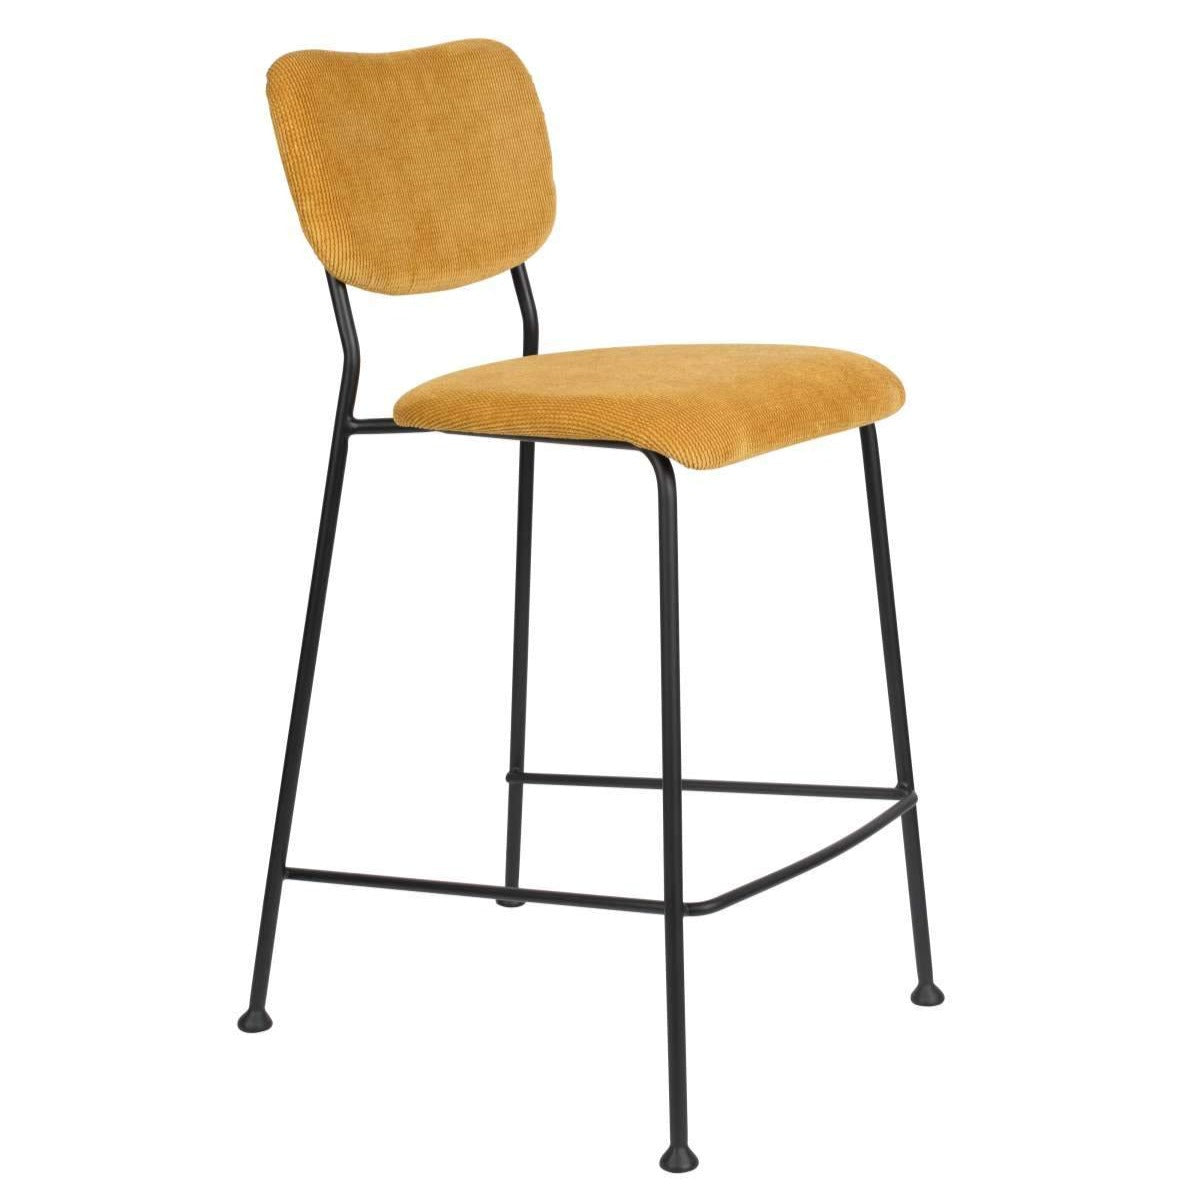 The comfort of using the kitchen island largely depends on the hocher. Benson is a minimalist bar stool that offers the right position of the seat and the presence of a footrest, which significantly increases the comfort of use. It will do great in a classic kitchen or arrangements referring to a retro style. Thanks to the simple steel frame, it will introduce a note of elegance to the room, and the soft back and seat will make it create your favorite place in the kitchen.